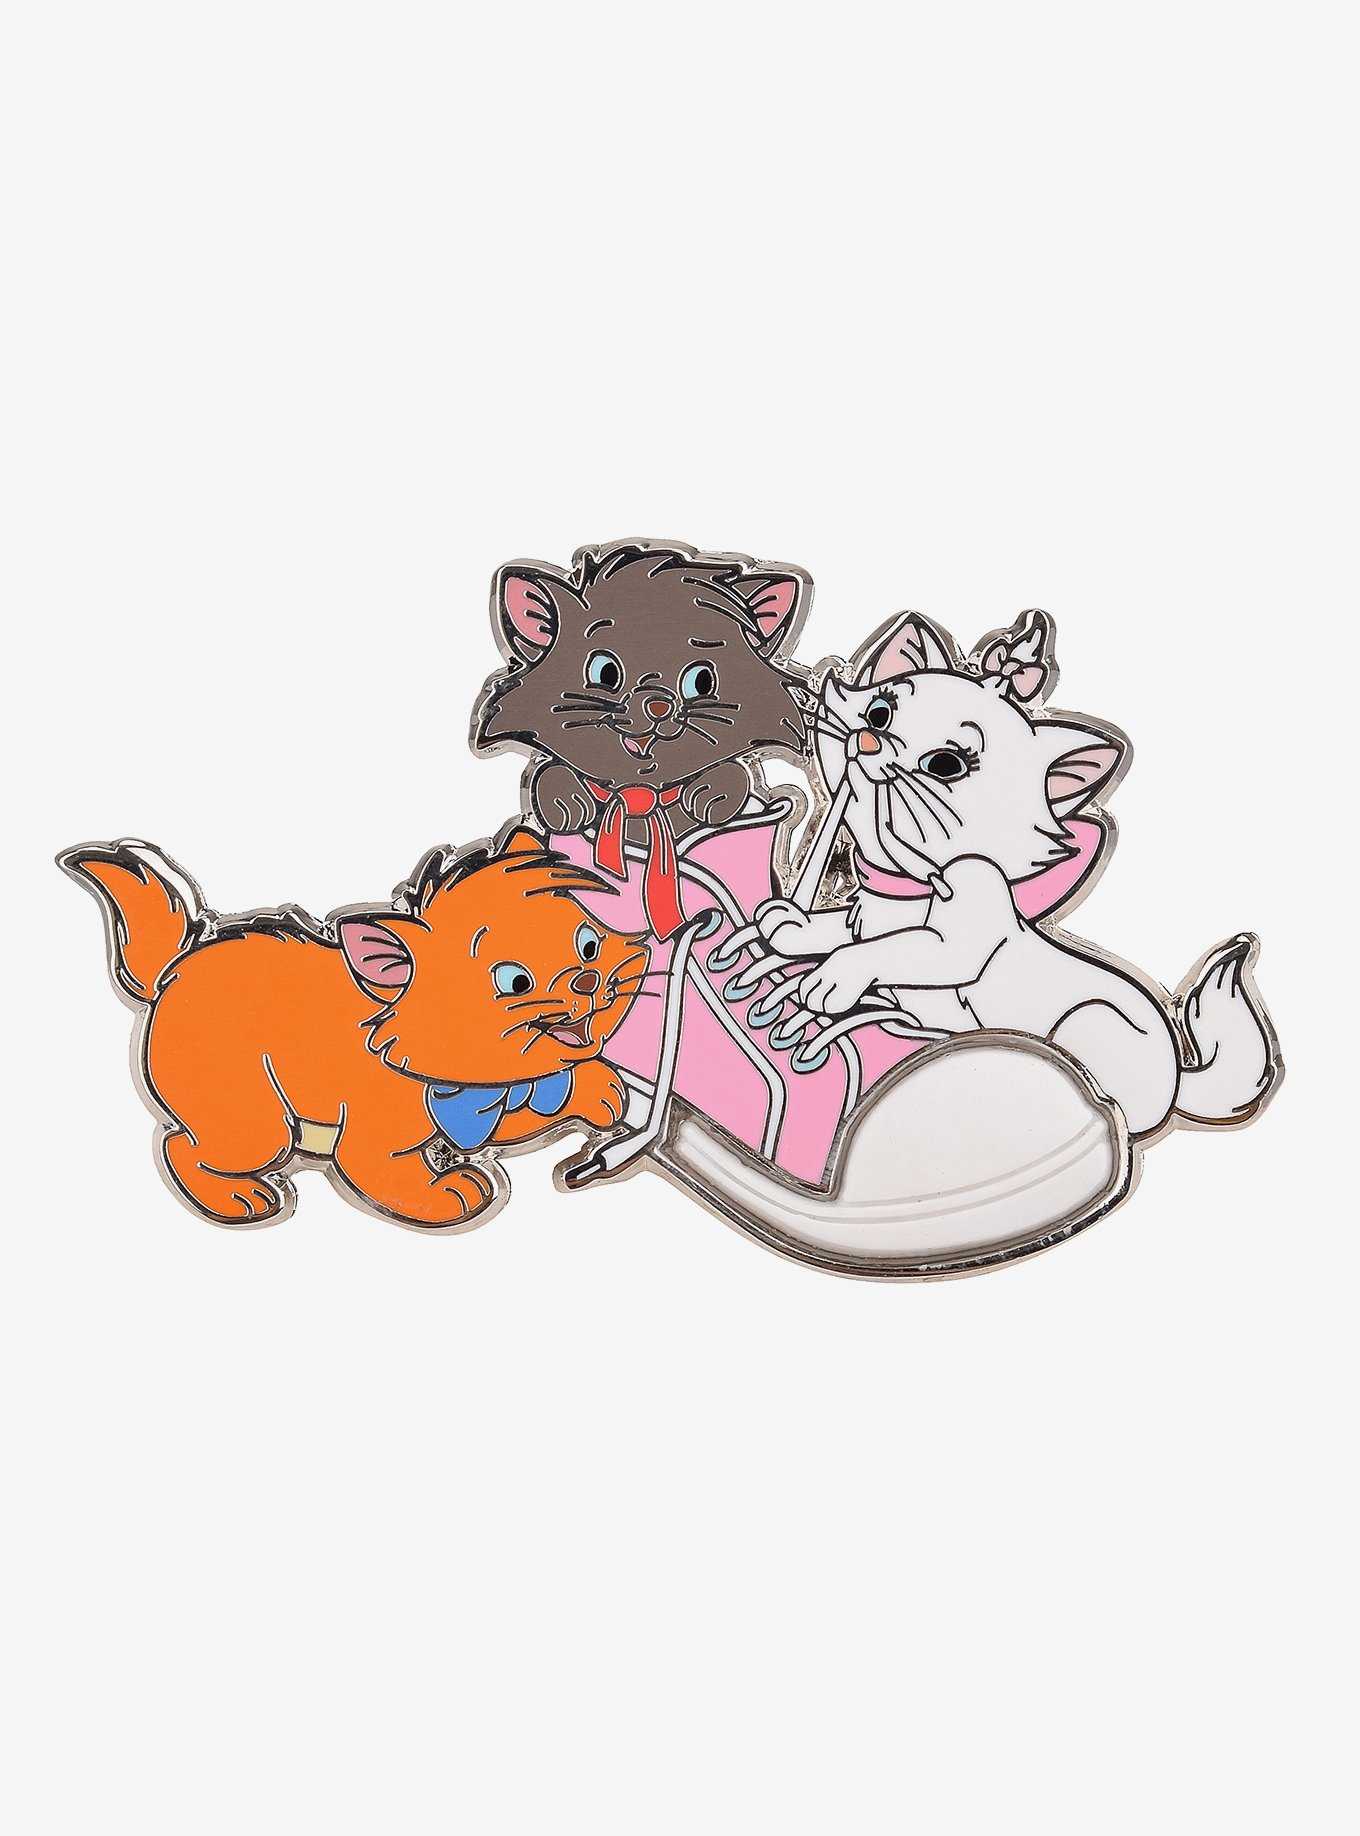 OFFICIAL The Aristocats Shirts, Gifts | Boxlunch Merchandise 